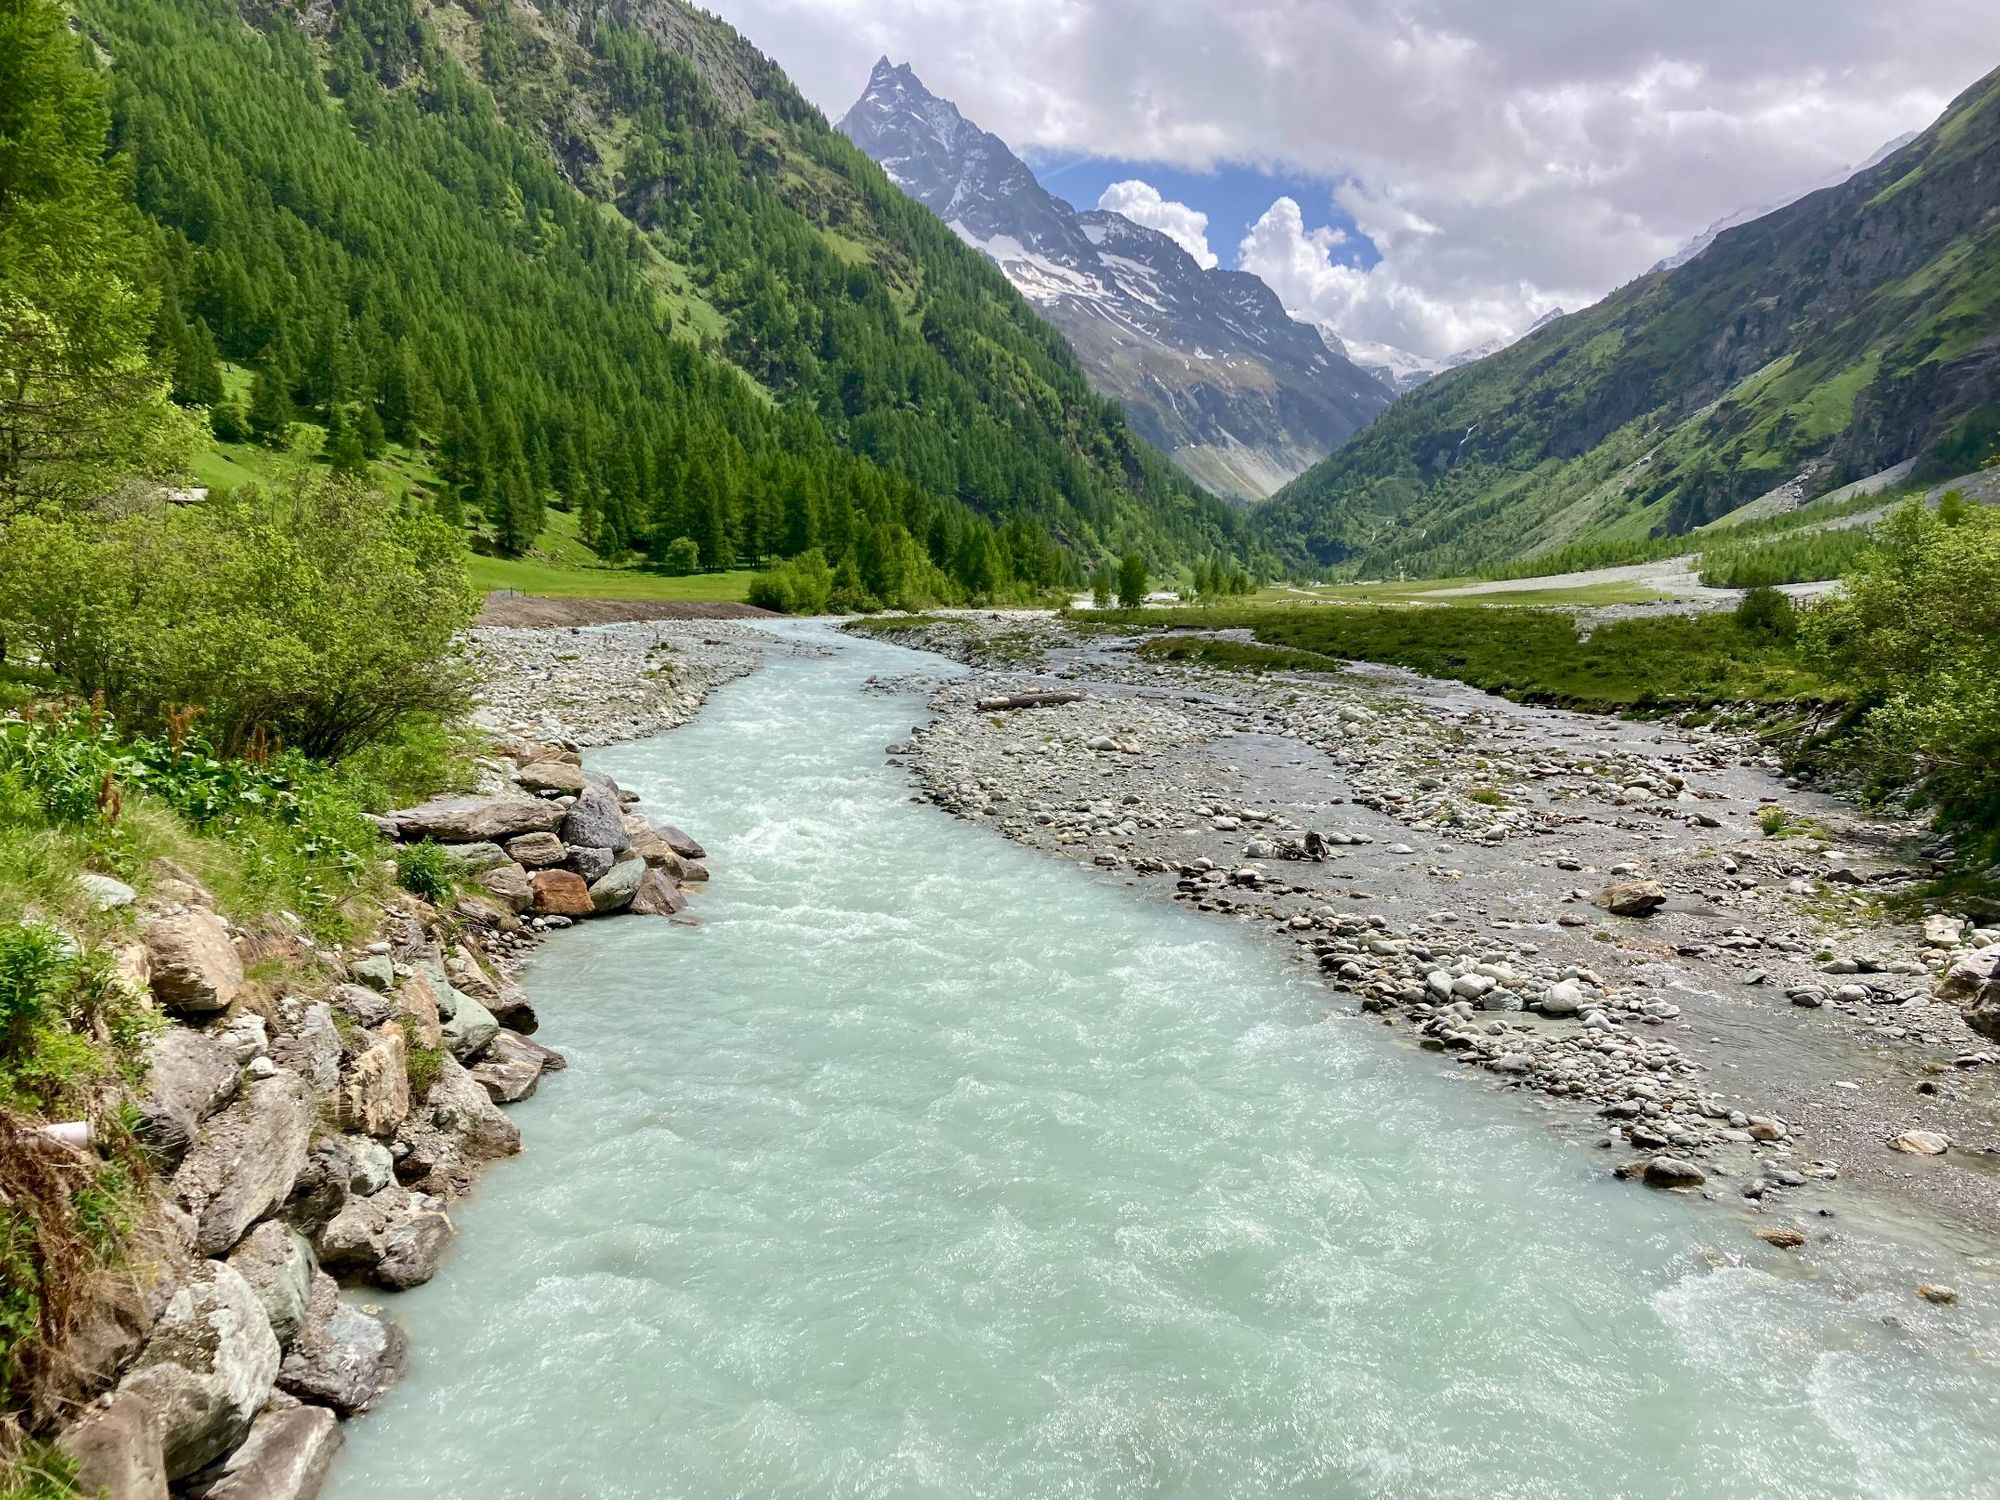 A glacial river and mountainous greenery as you come into the town of Zinal. Photo: Getty